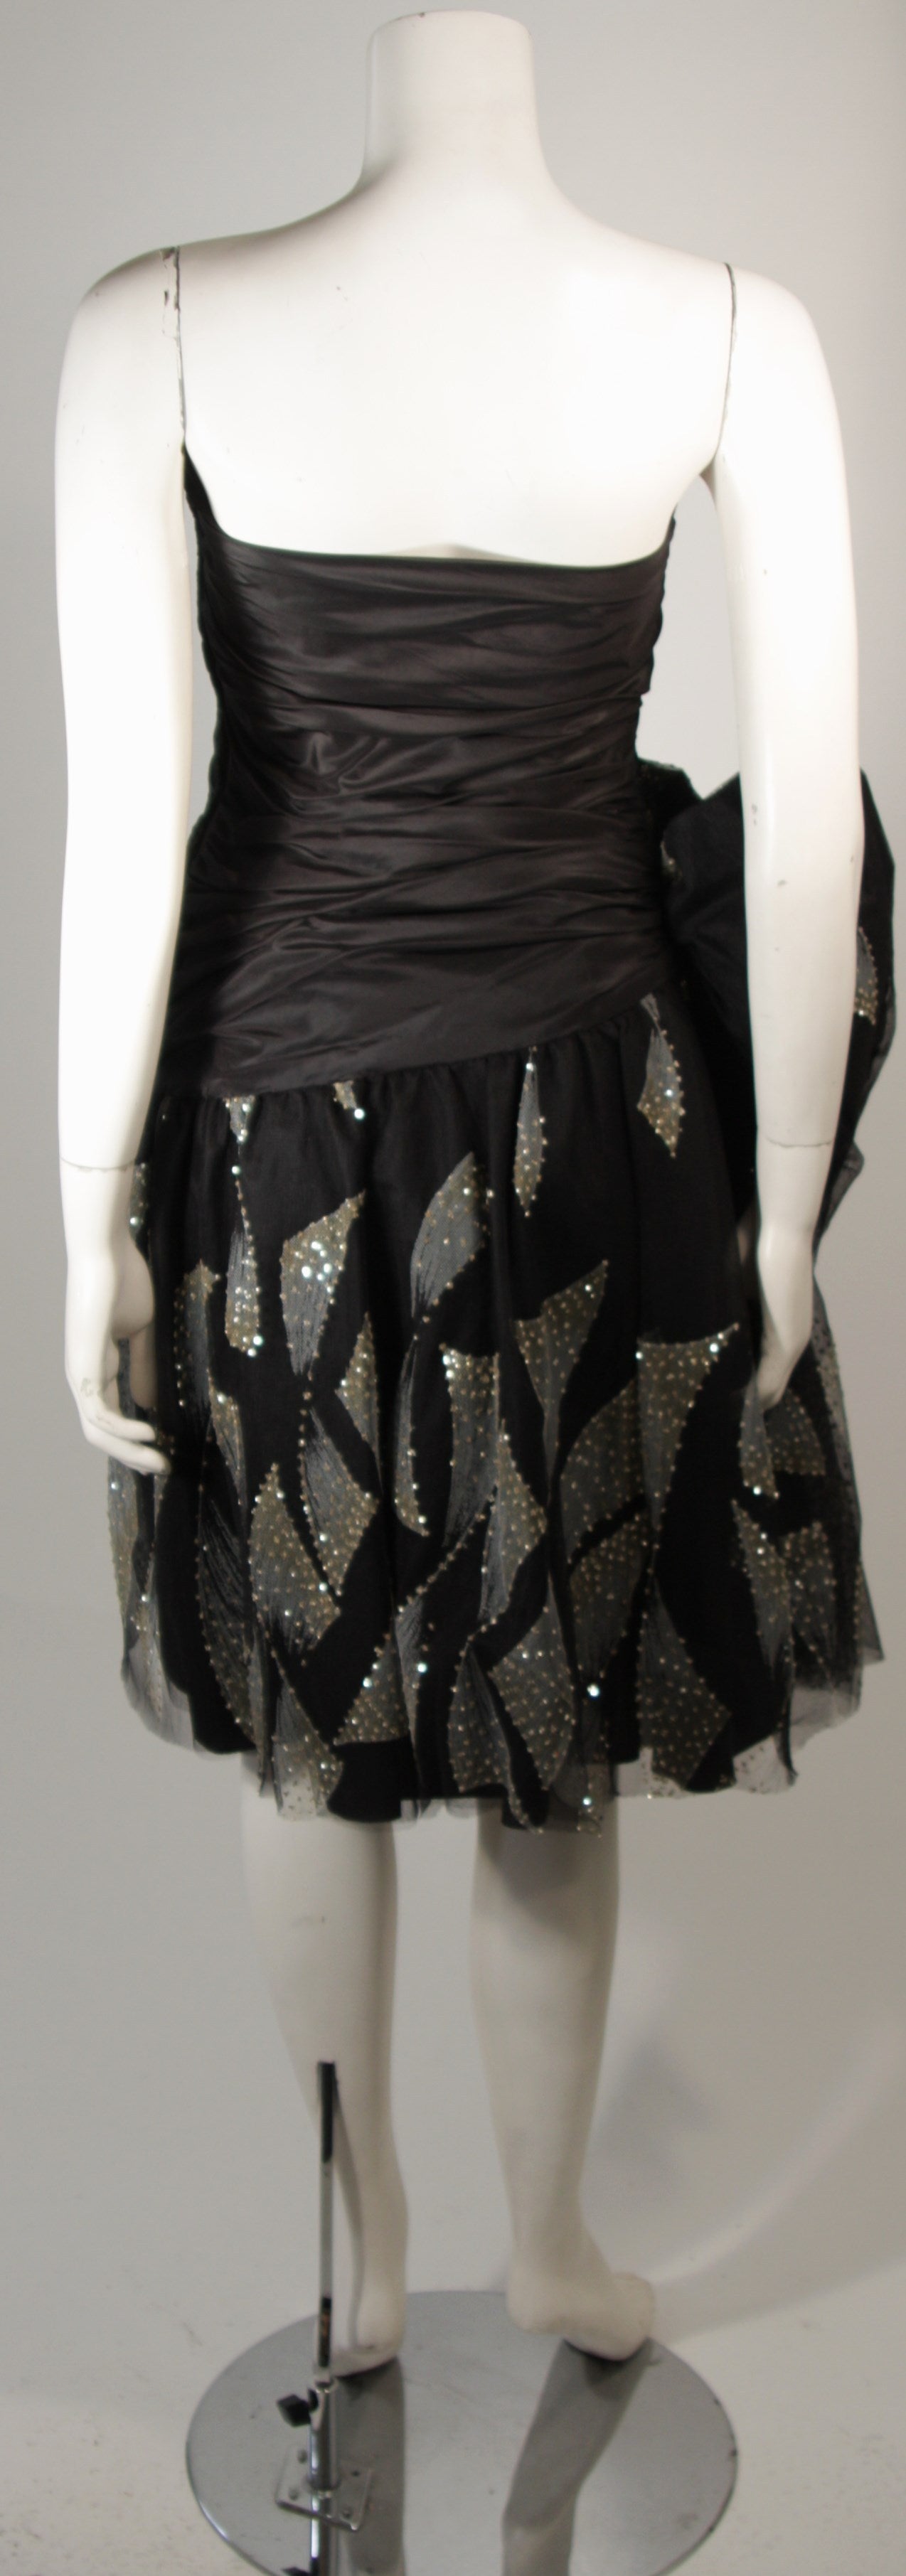 Vicky Tiel Black Cocktail Dress with Metallic Accents Size Small 3